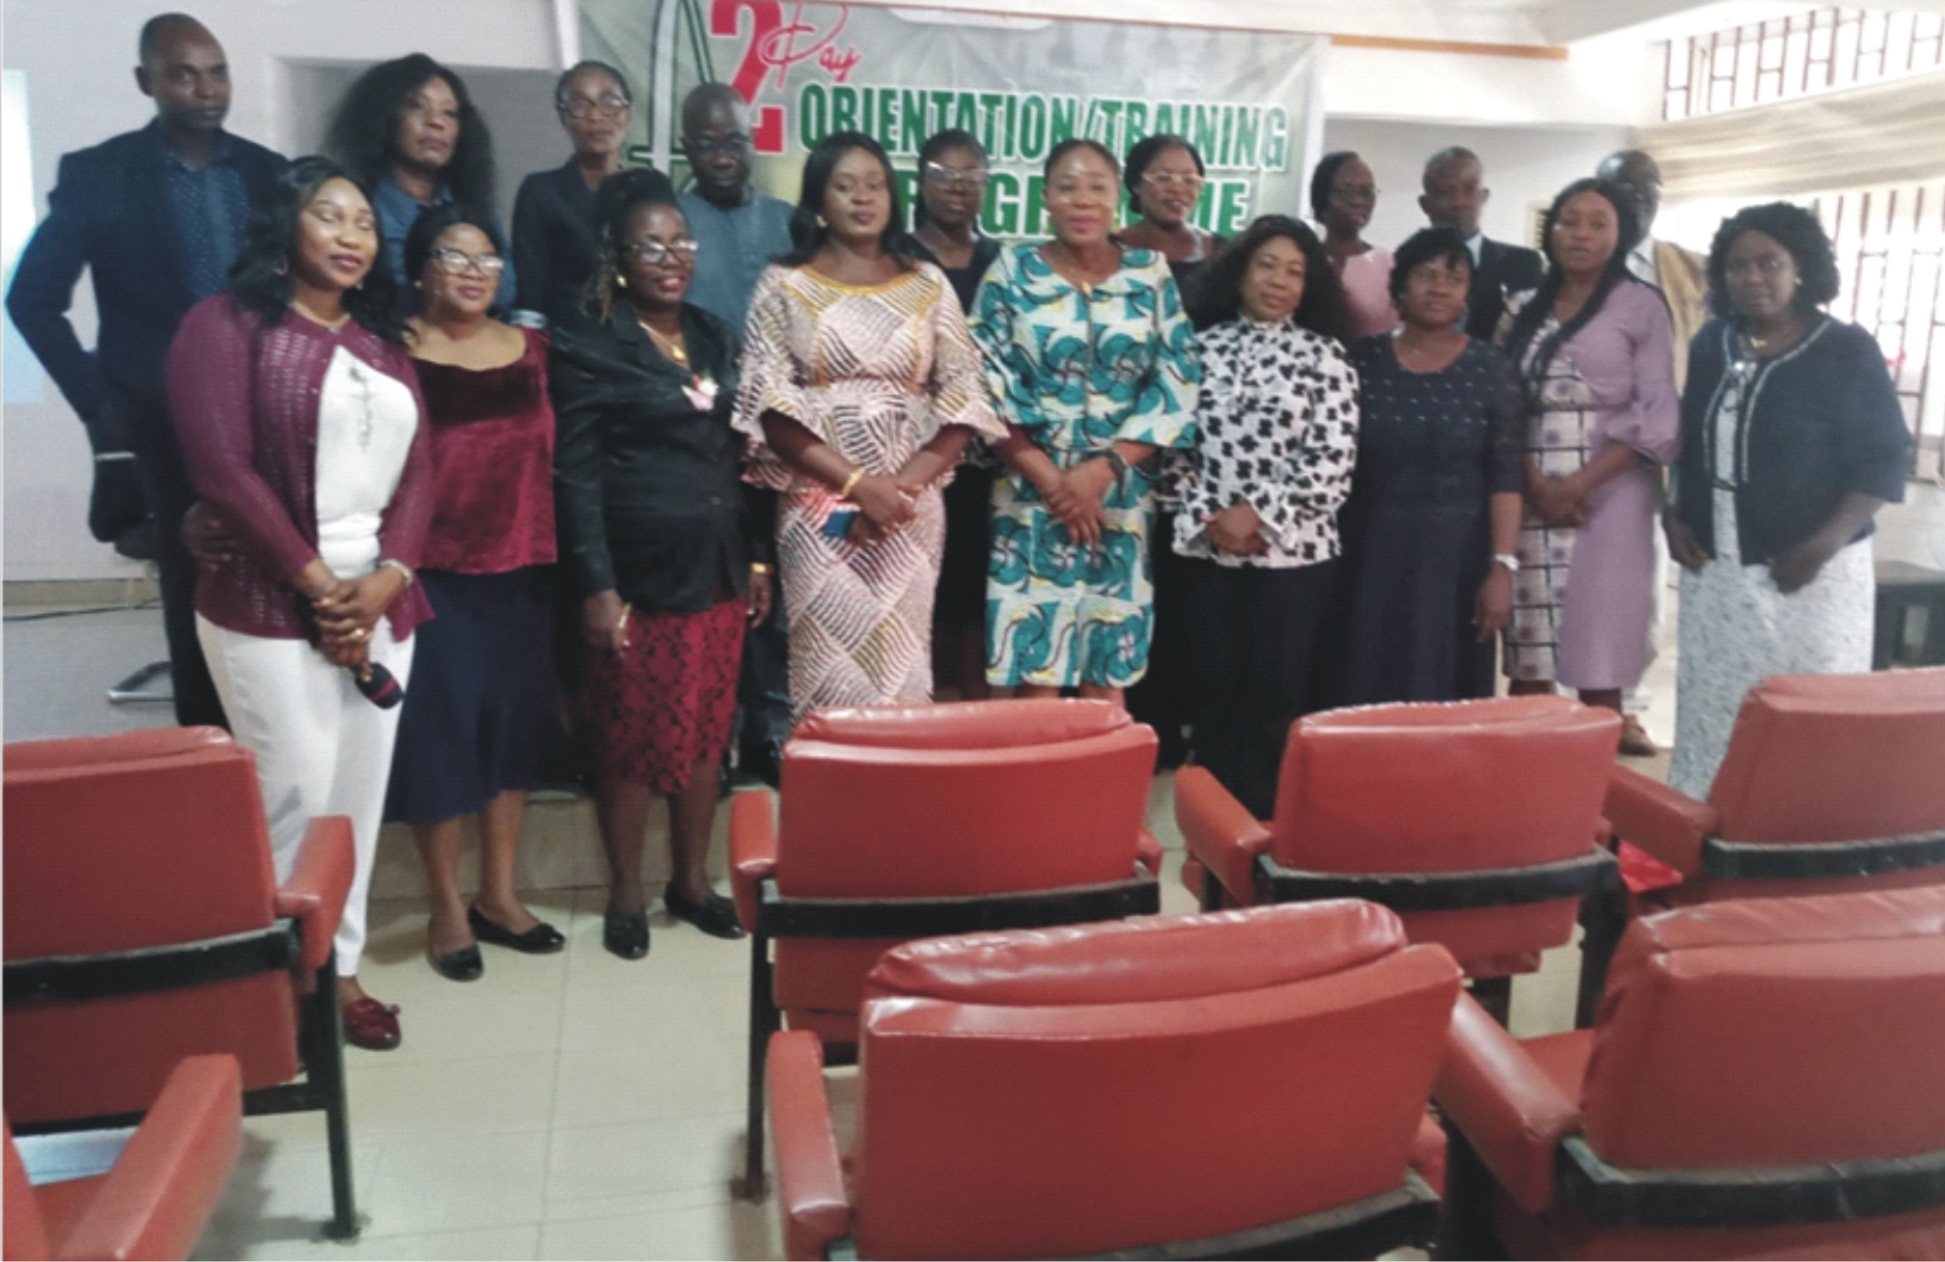 Adviser to the Ondo State Governor on Gender, Mrs. Olamide Falana (4thL), Senior Special Assistant to the Governor on Gender, Mrs. Temitope Daniyan  (M), Executive Secretary of the Agency, Bolanle Joel -Ogundadegbe (3rdR) and staff members of the agency at the event   Photo: Josephine Oguntoyinbo